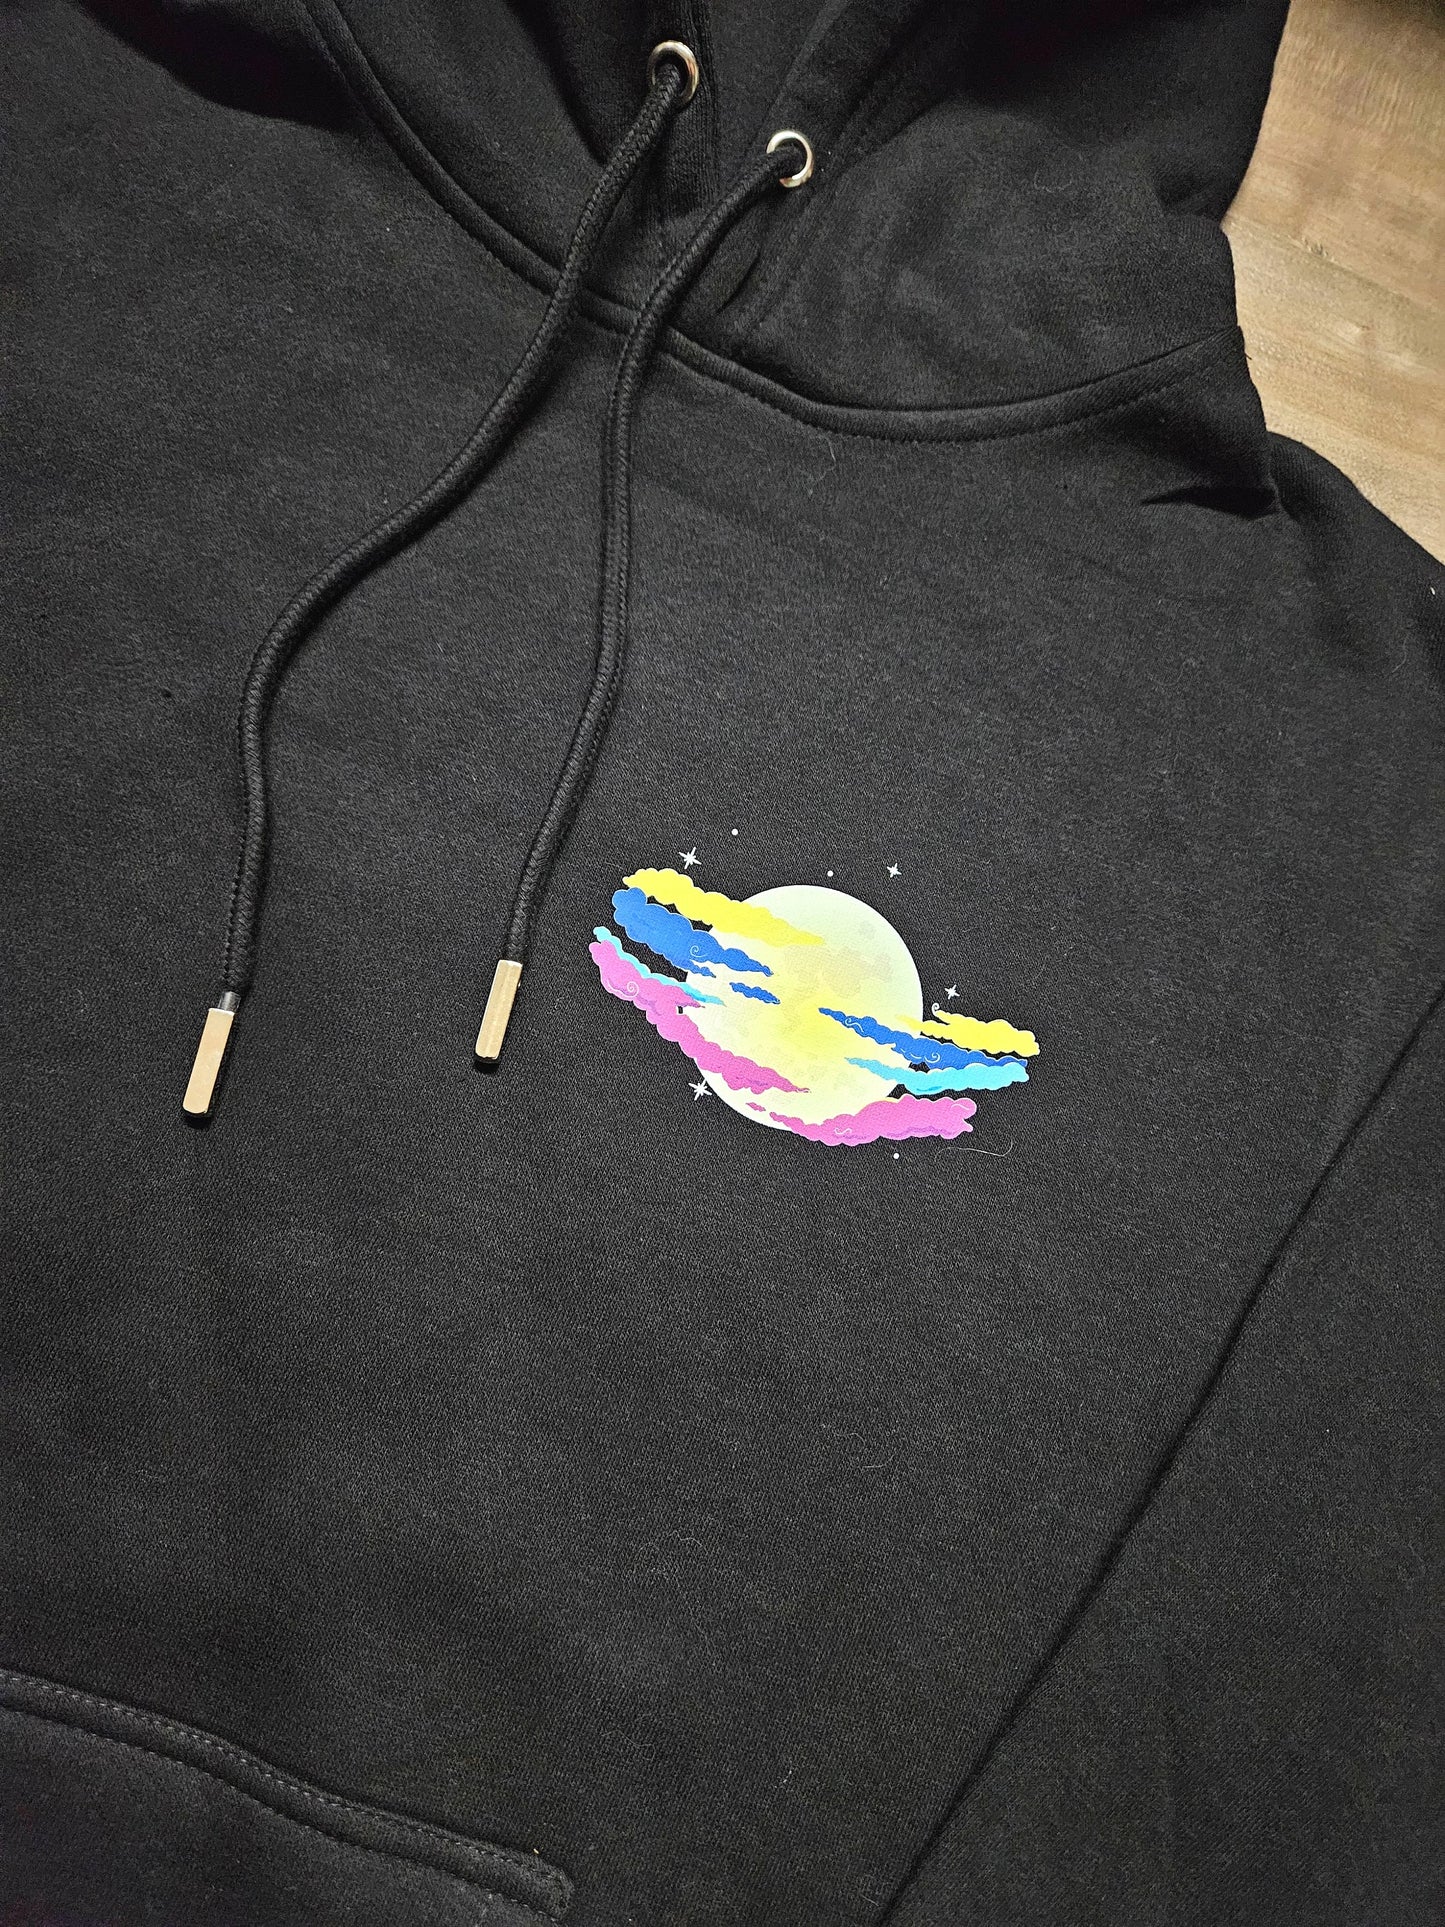 Dreamy Wanderer Hoodie - Moon, Clouds, Stars, Mountains, Nature, Colorful Dreamcore Vibe